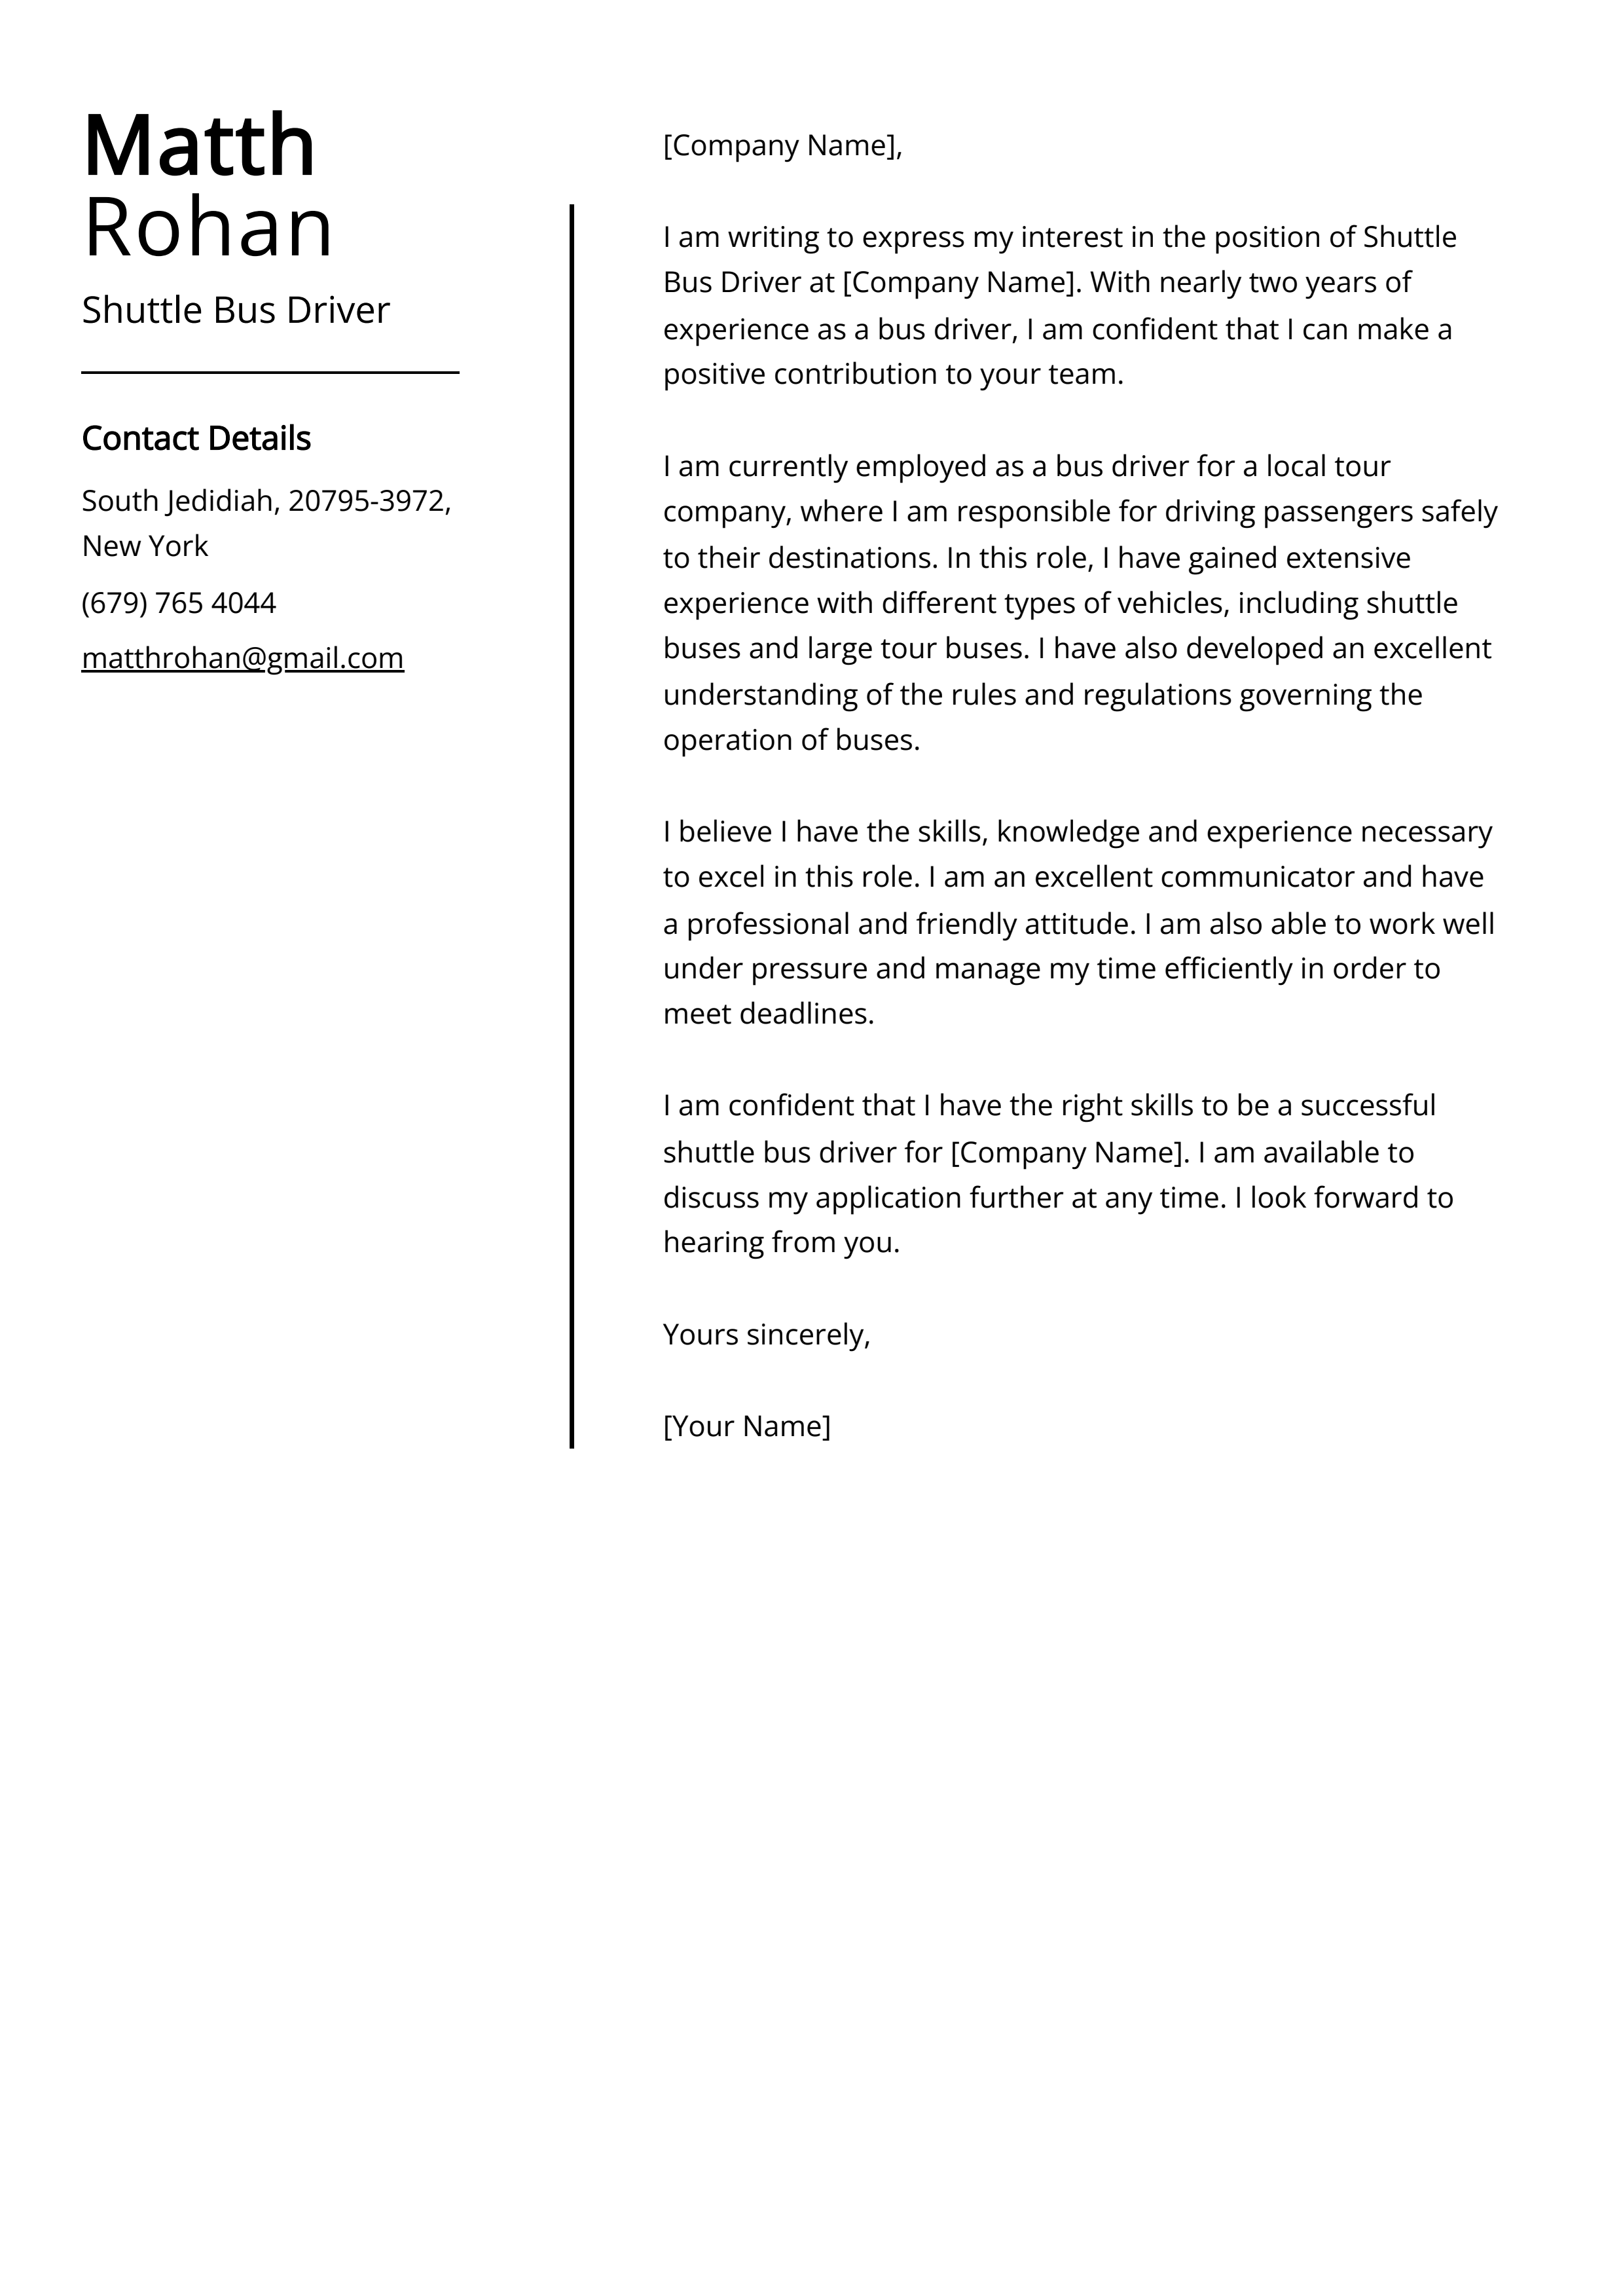 Shuttle Bus Driver Cover Letter Example